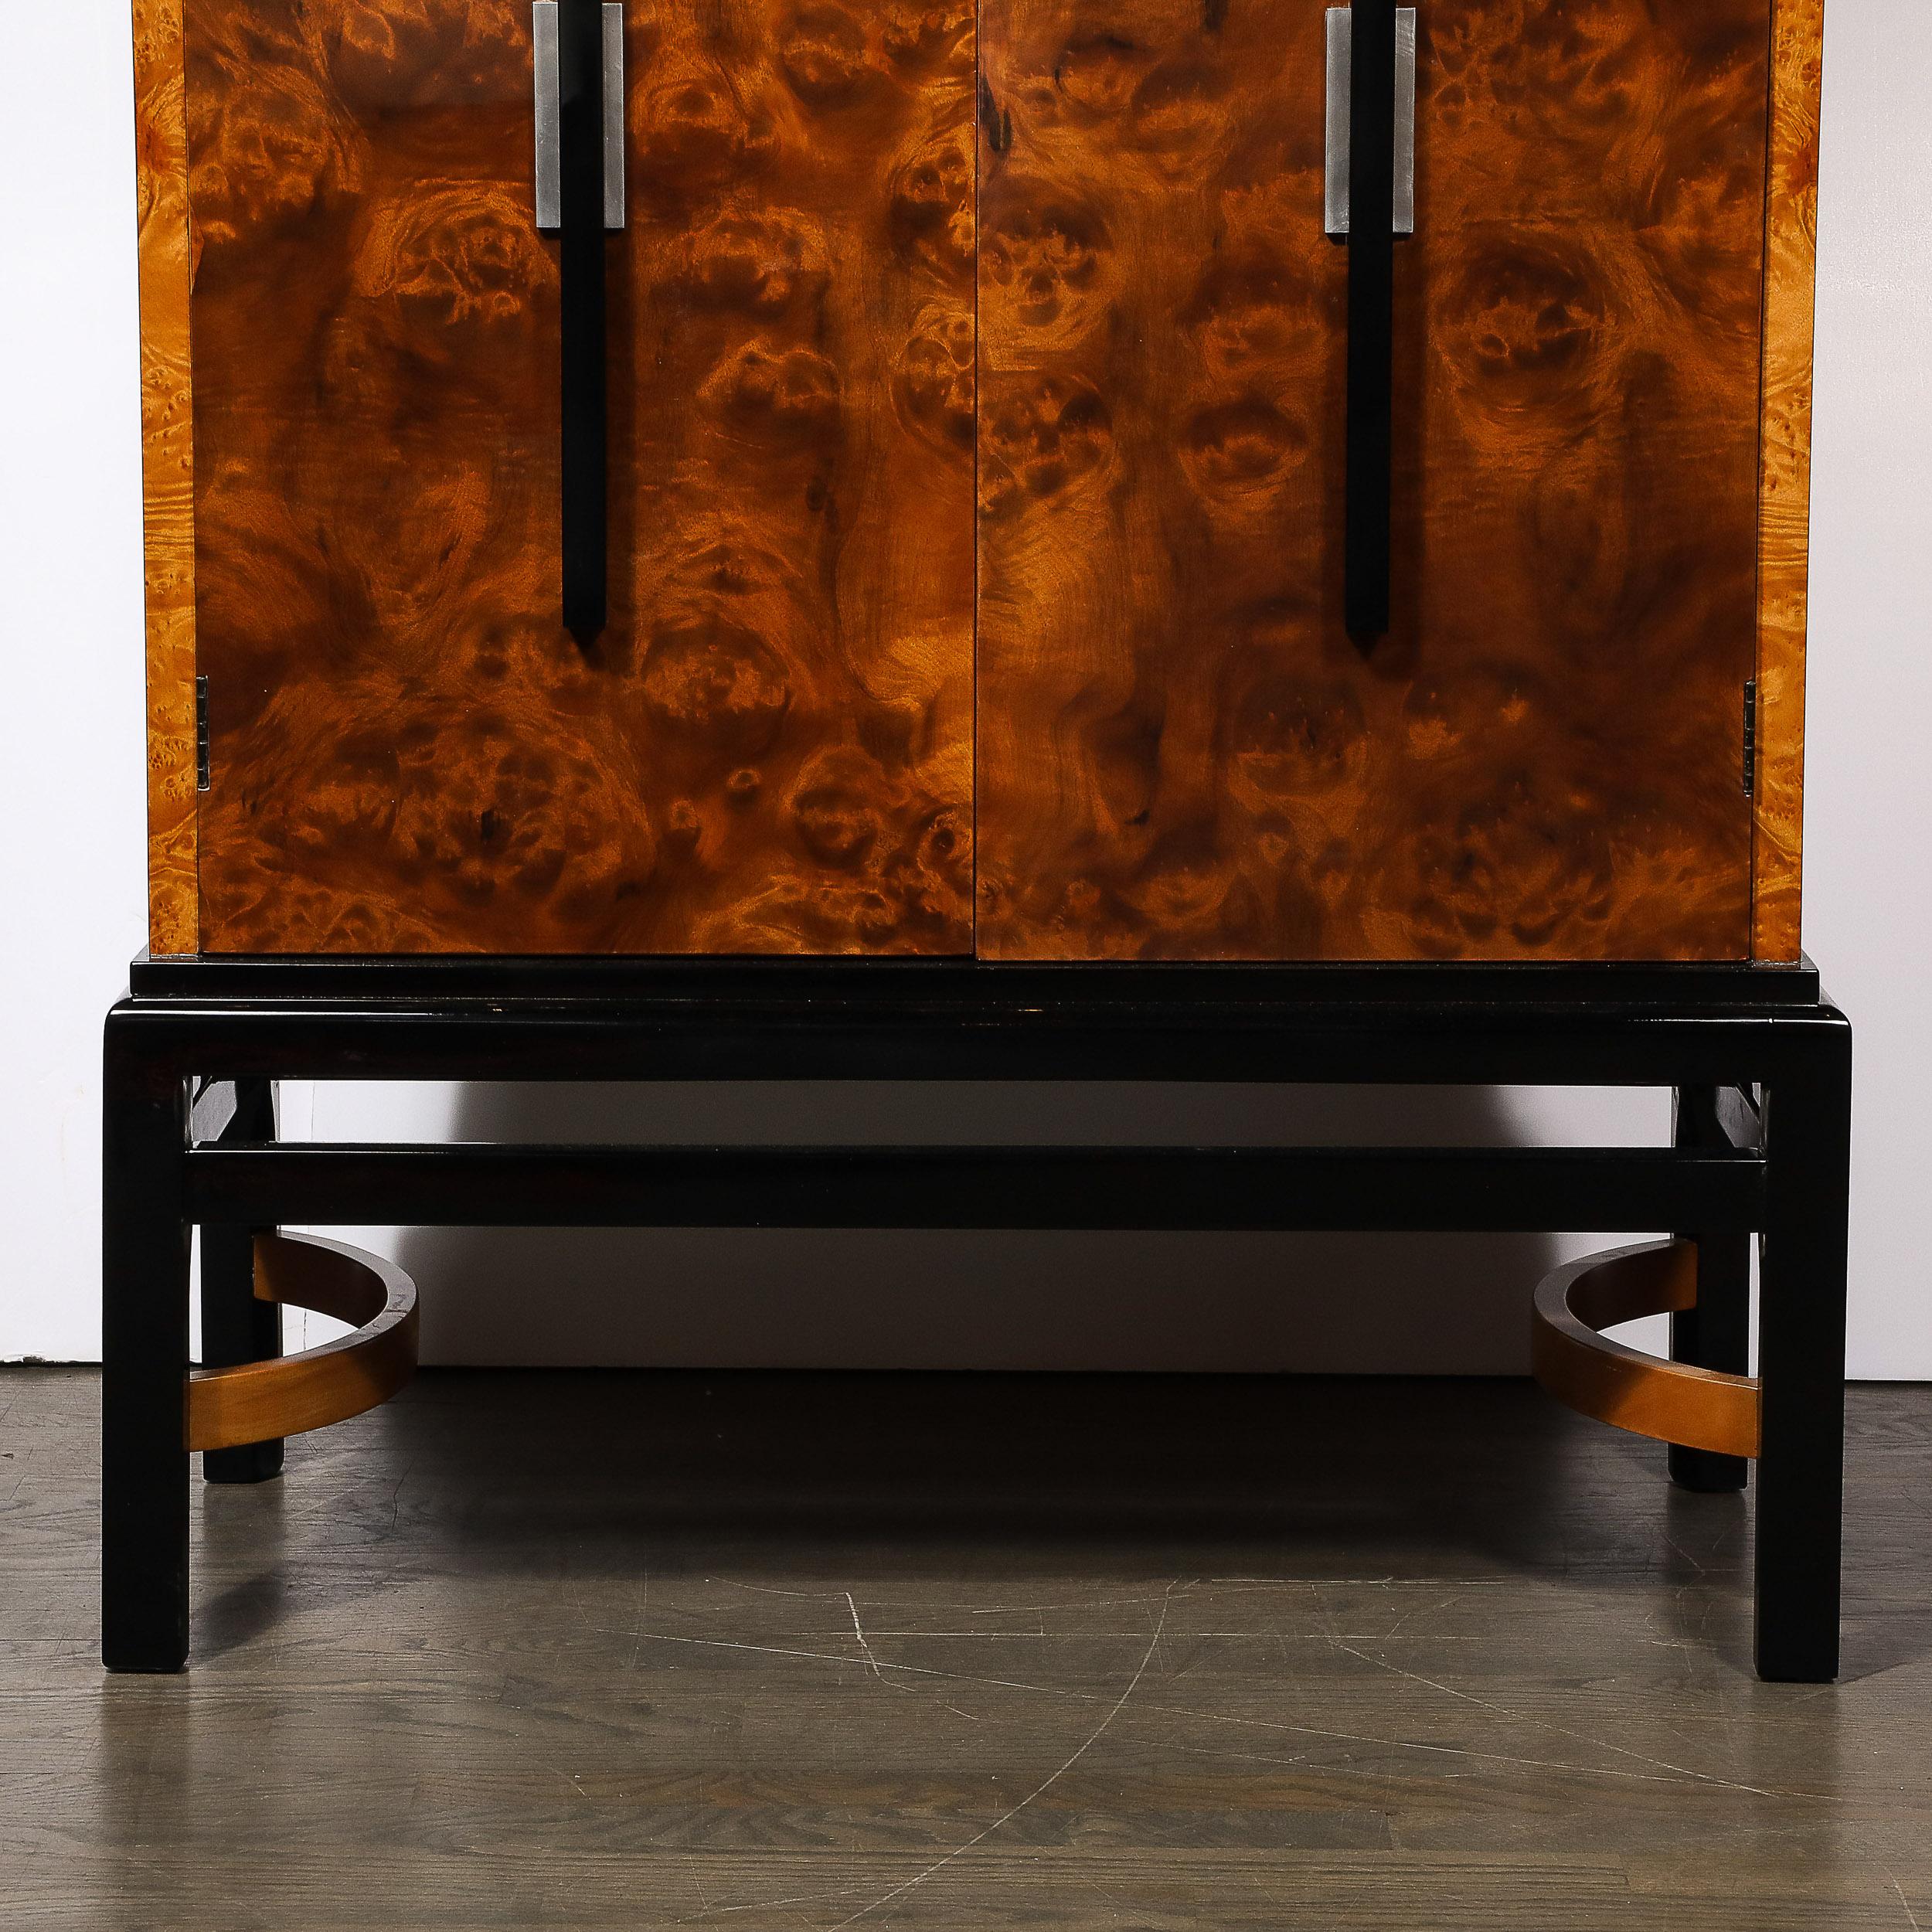 Aluminum Art Deco Burled Walnut Bar Cabinet by Donald Deskey for the Hastings Company